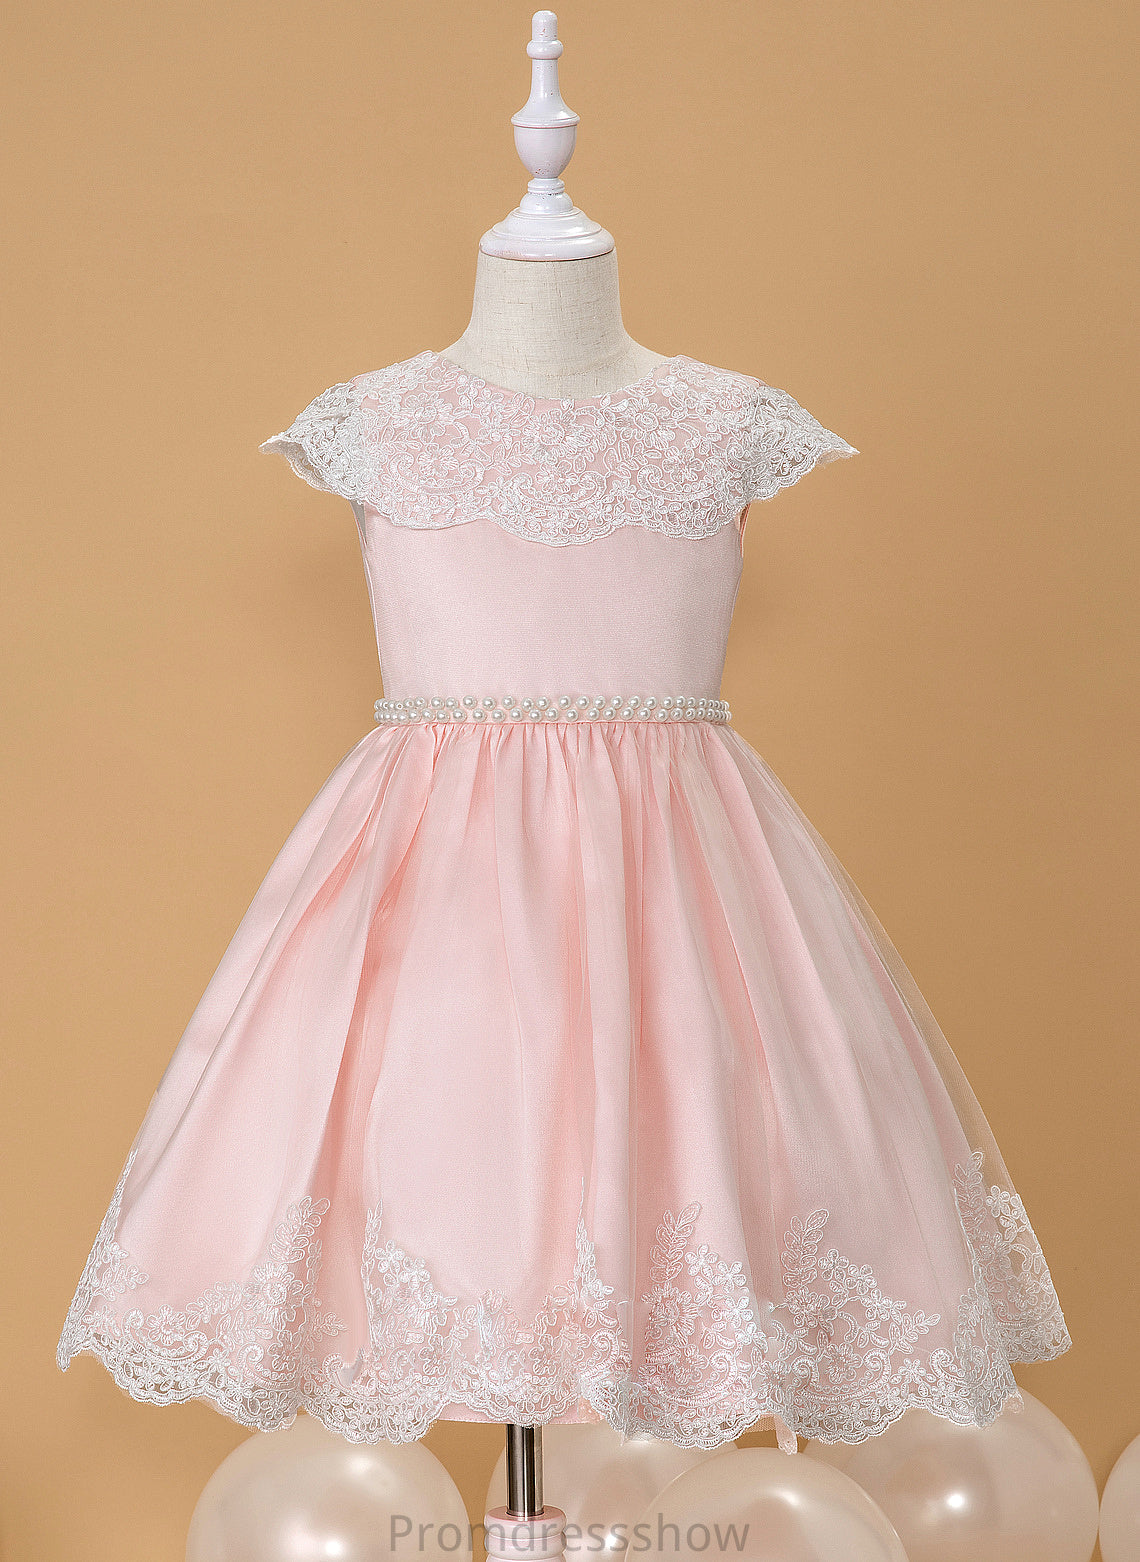 - Ball-Gown/Princess Knee-length Dress Satin/Lace Neck Sleeveless With Flower Scoop Beading/Bow(s) Girl Flower Girl Dresses Marely